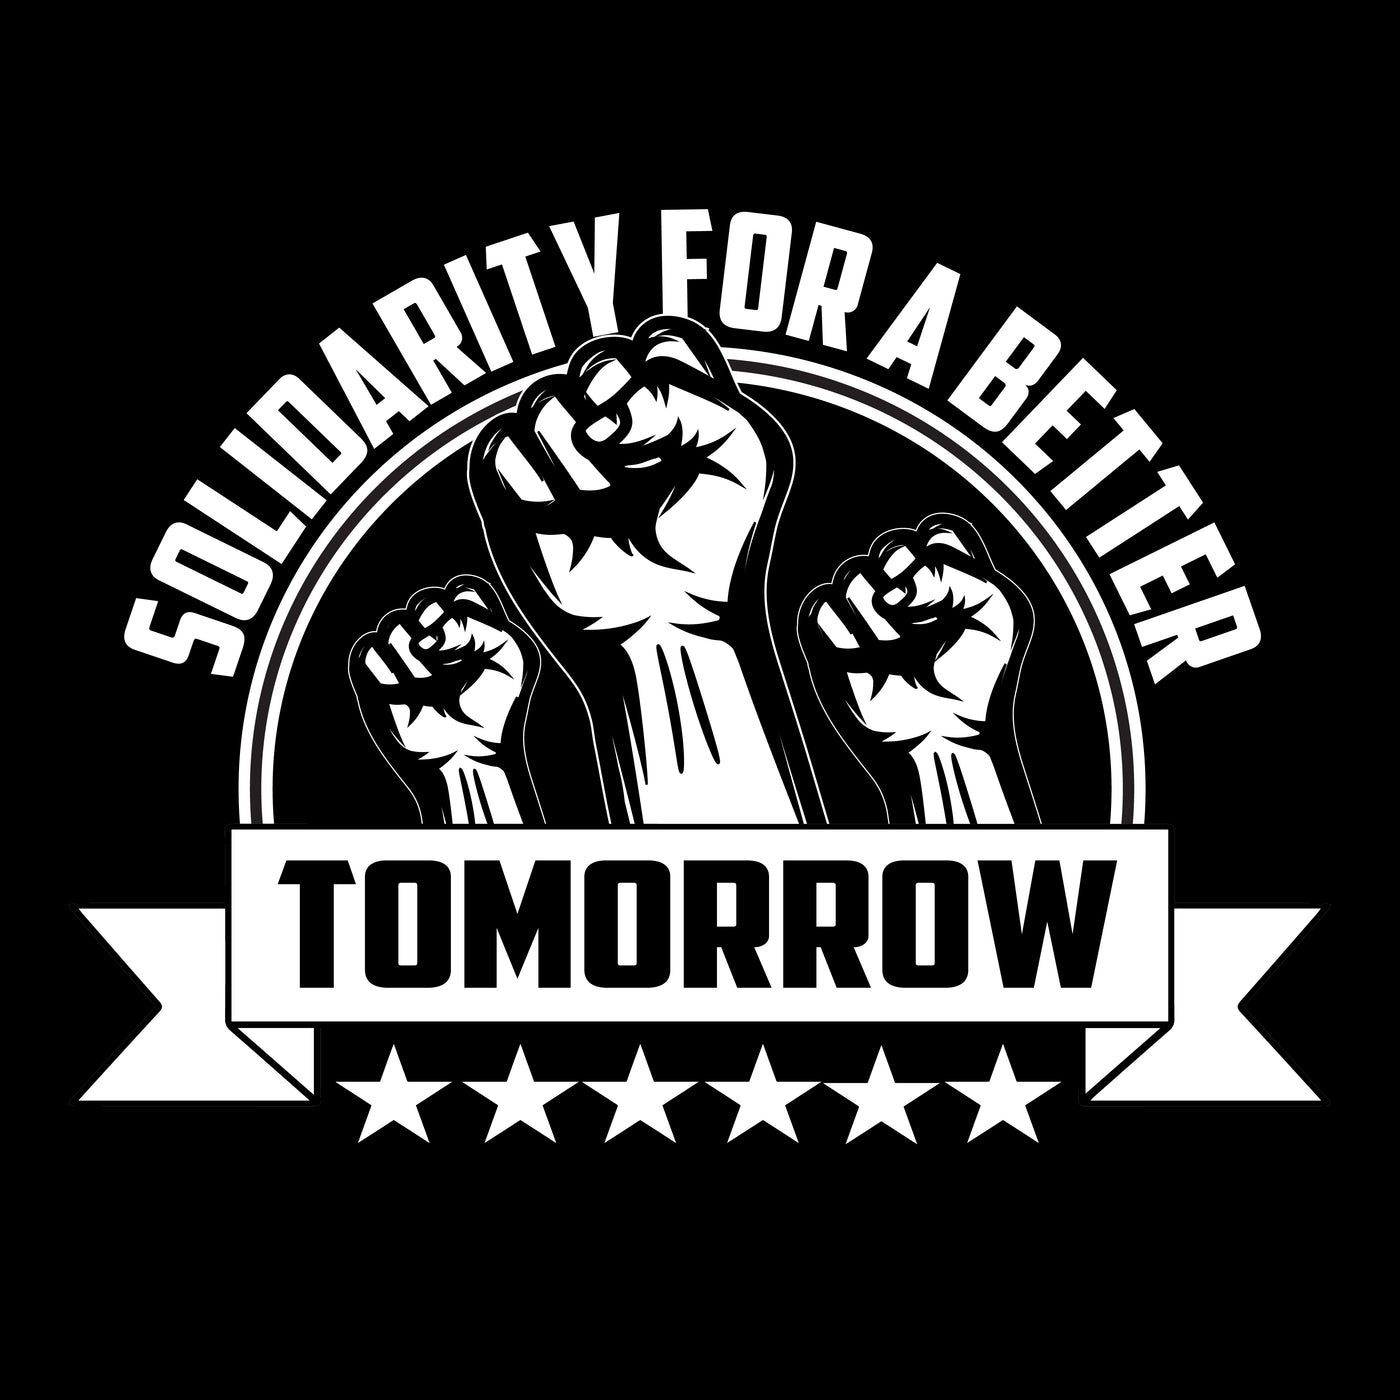 Solidarity For A Better Tomorrow